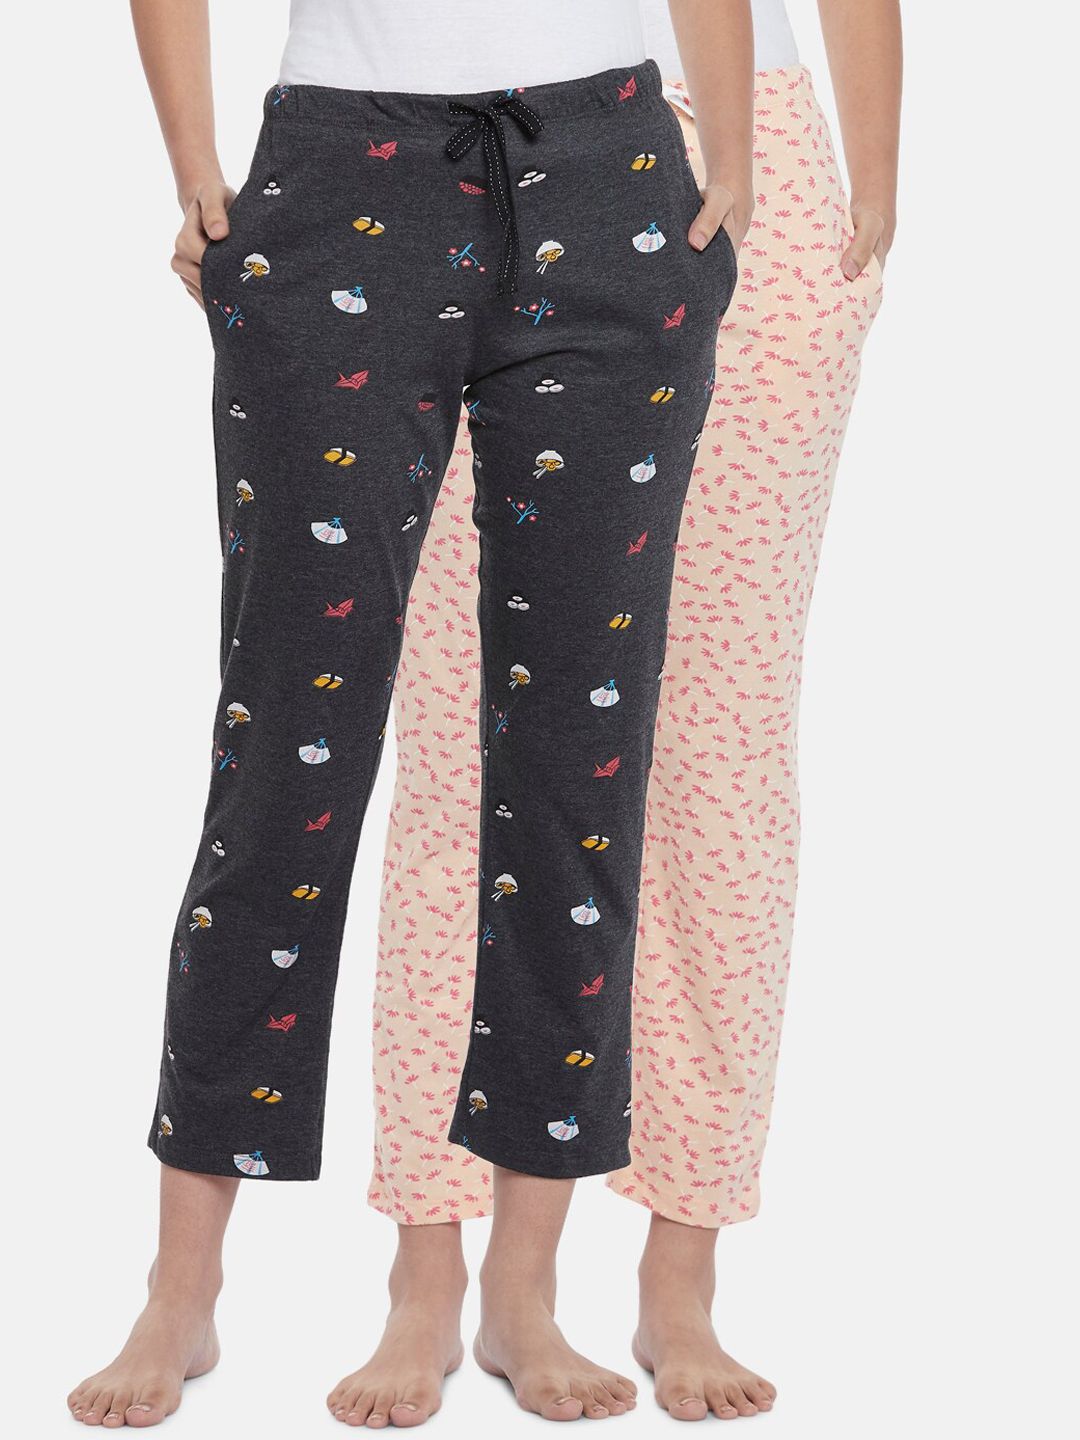 Dreamz by Pantaloons Pack of 2 Charcoal Grey & Beige Printed Lounge Pants Price in India